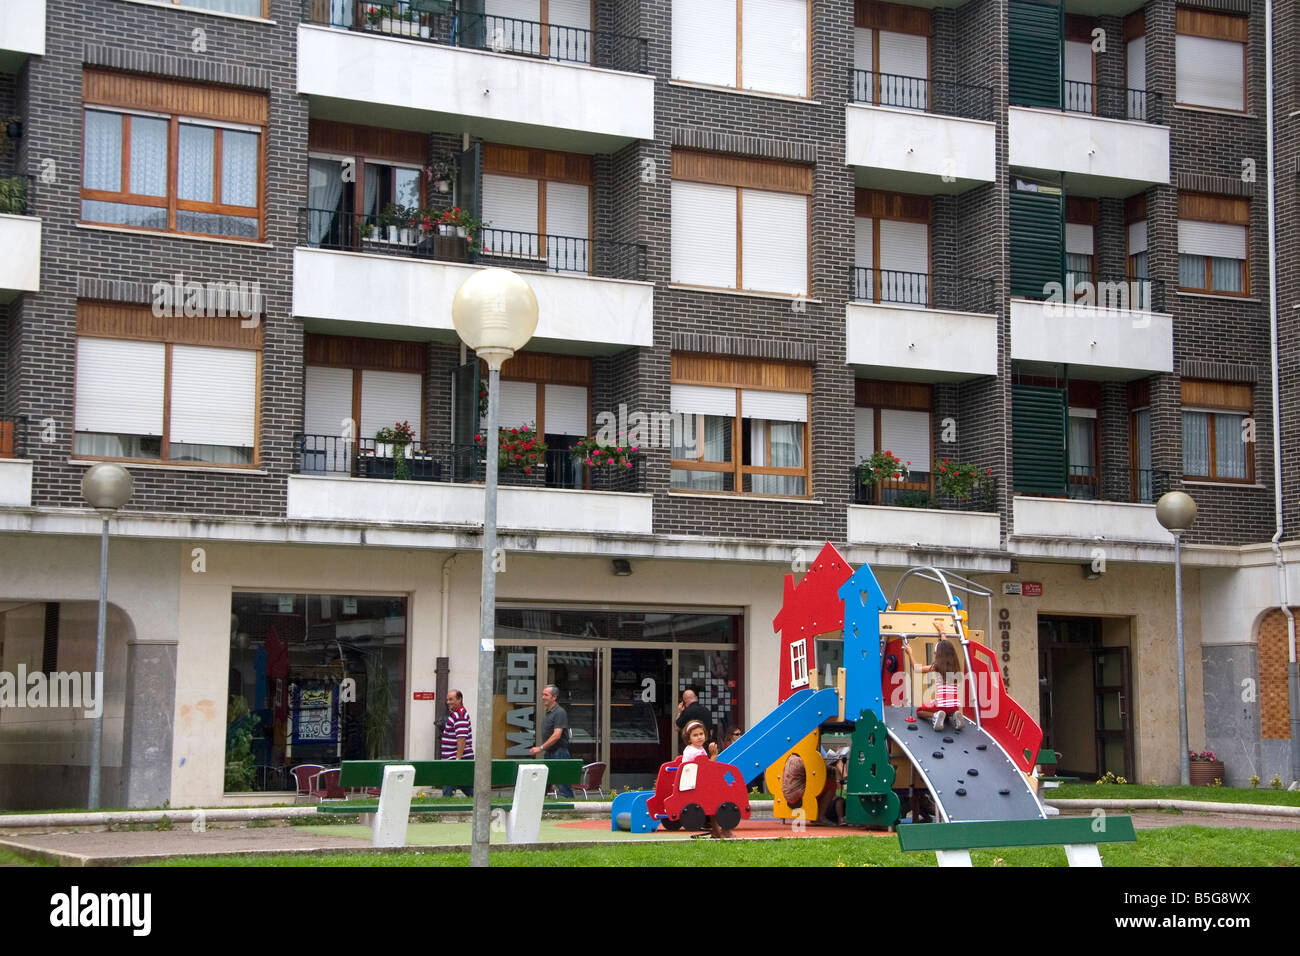 Children use playground equipment in front of an apartment housing unit in Guernica northern Spain Stock Photo